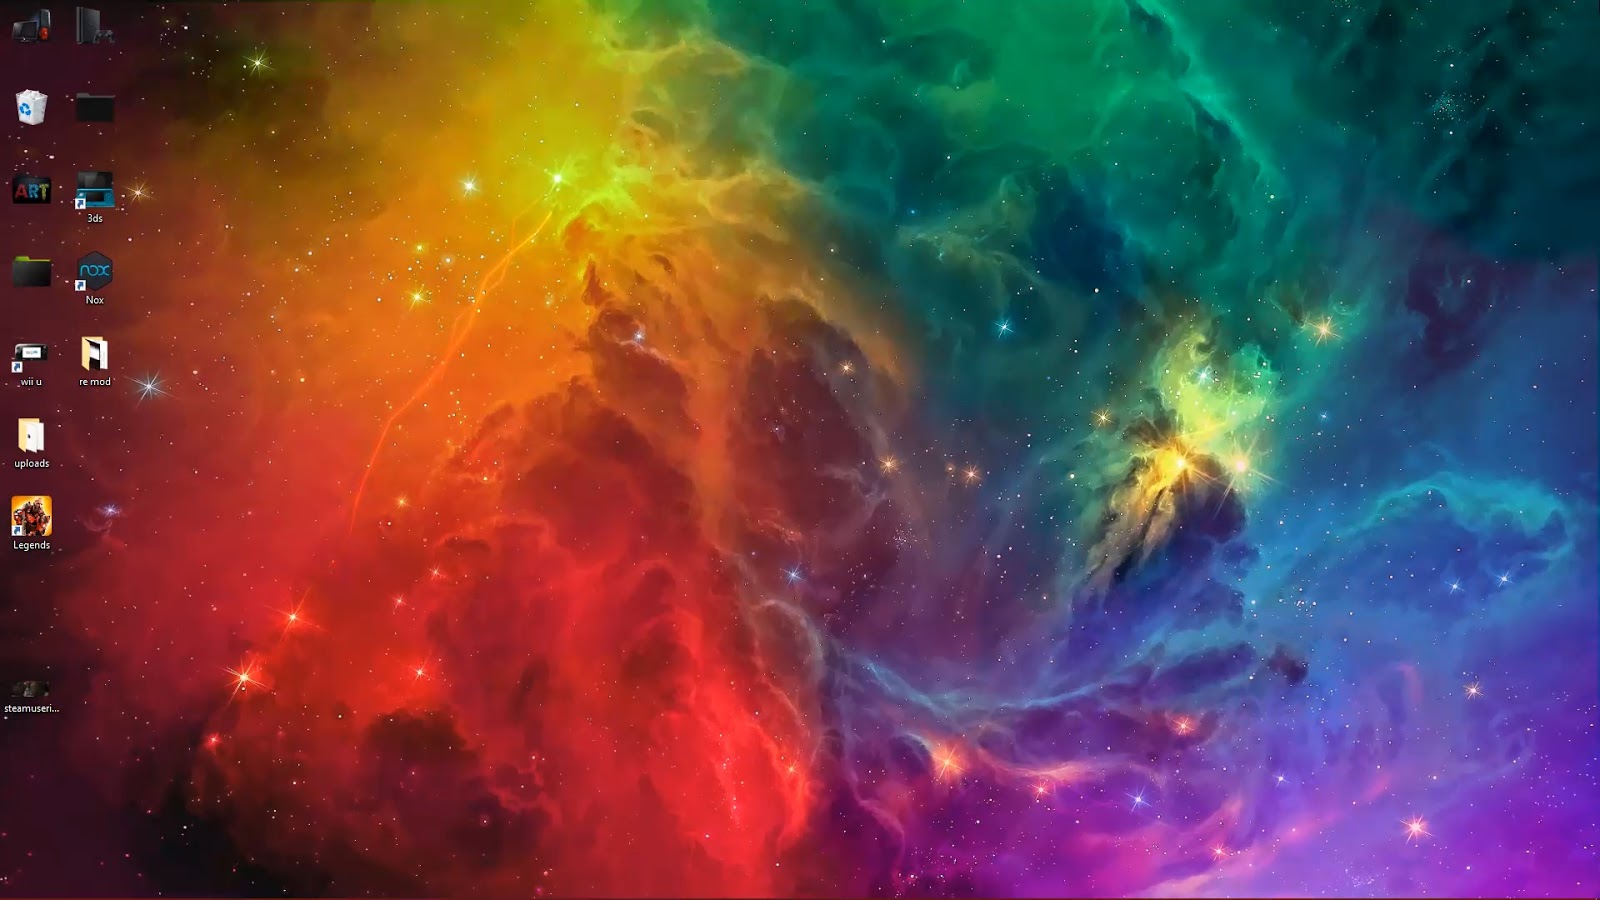 Colorful Space 4K live wallpaper free download - wallpaper engine